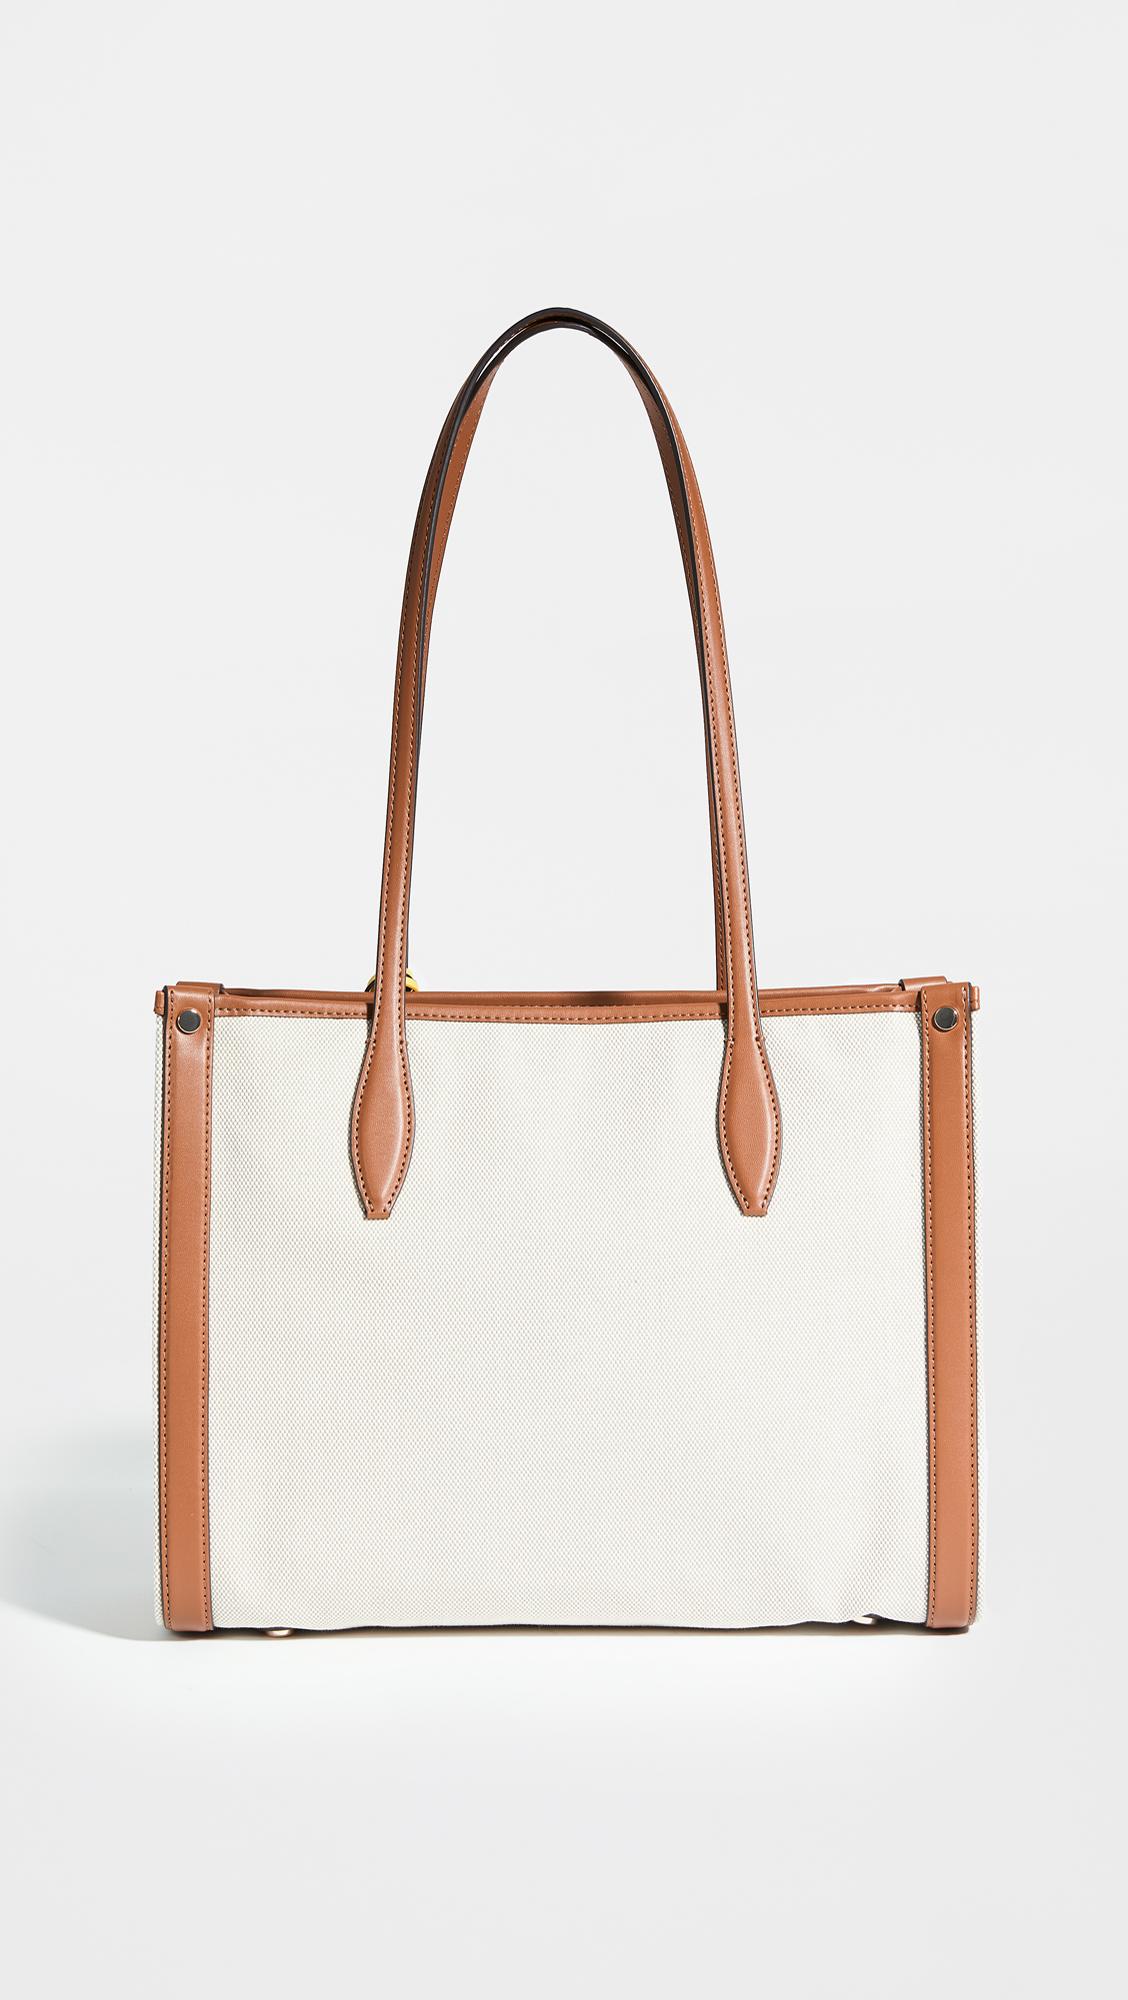 Kate Spade Market Canvas Large Tote in Natural